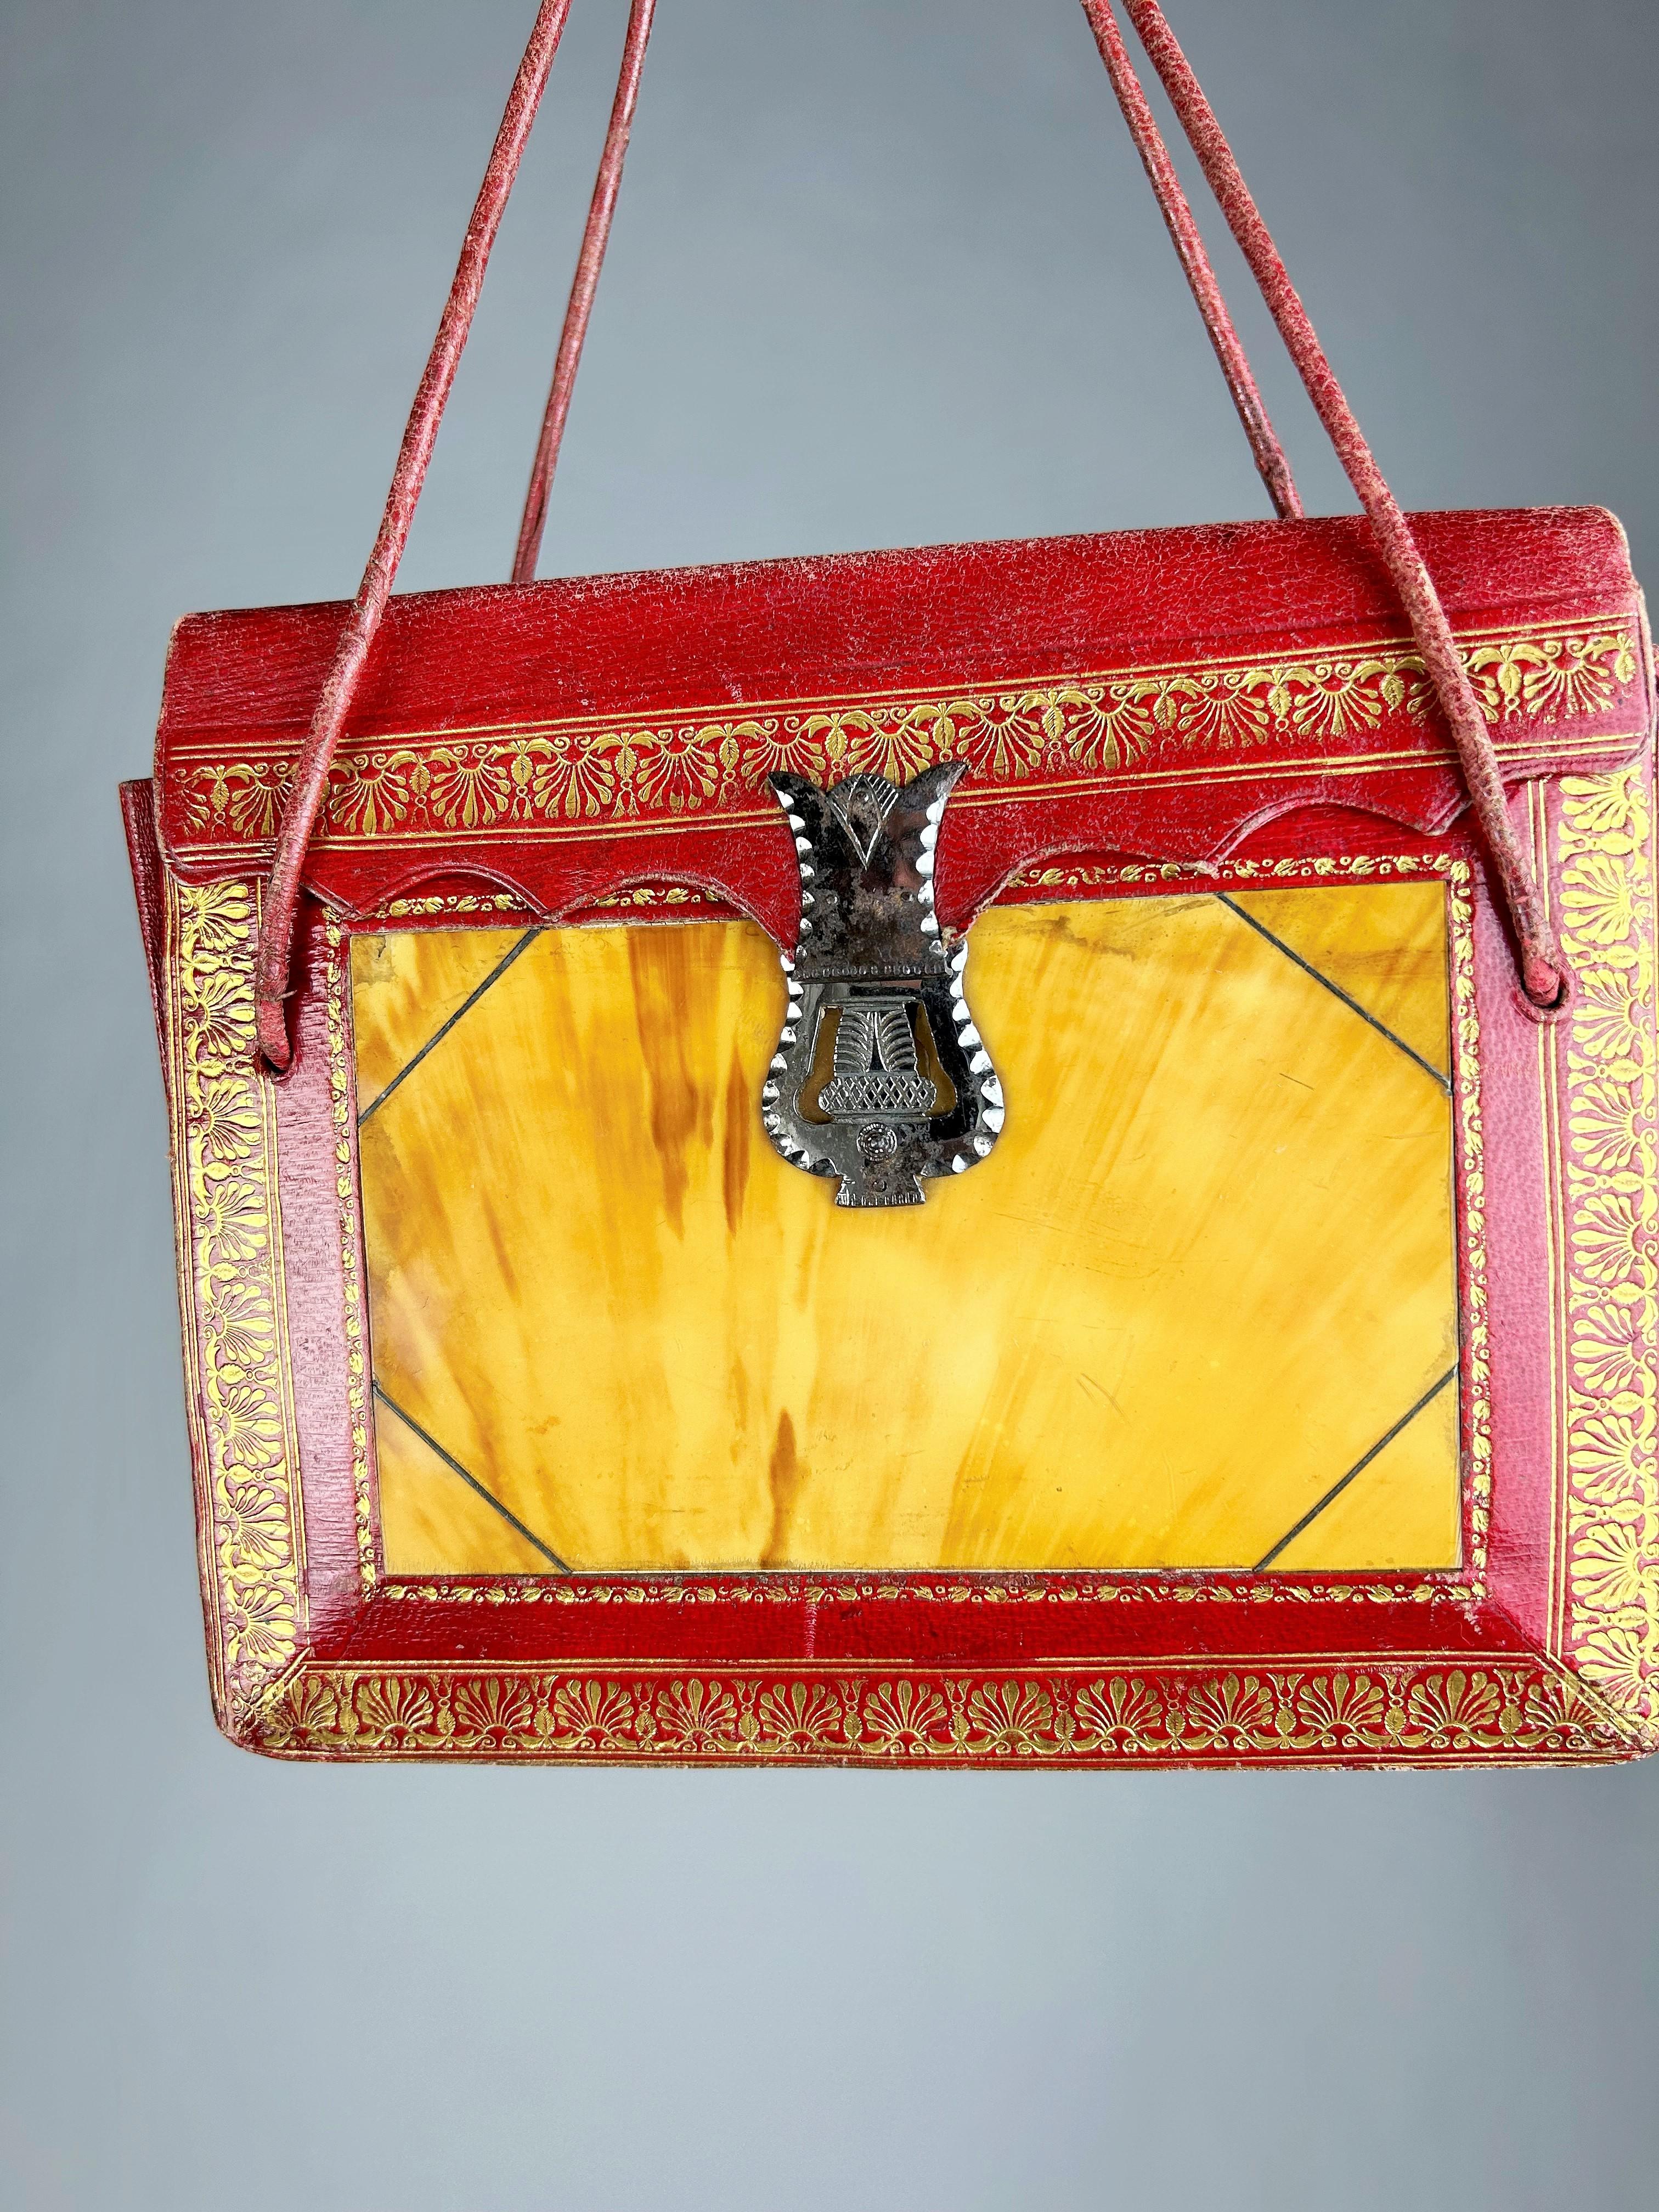 A precious red Leather Reticule with tortoiseshell inlay - England Dated 1836 For Sale 10